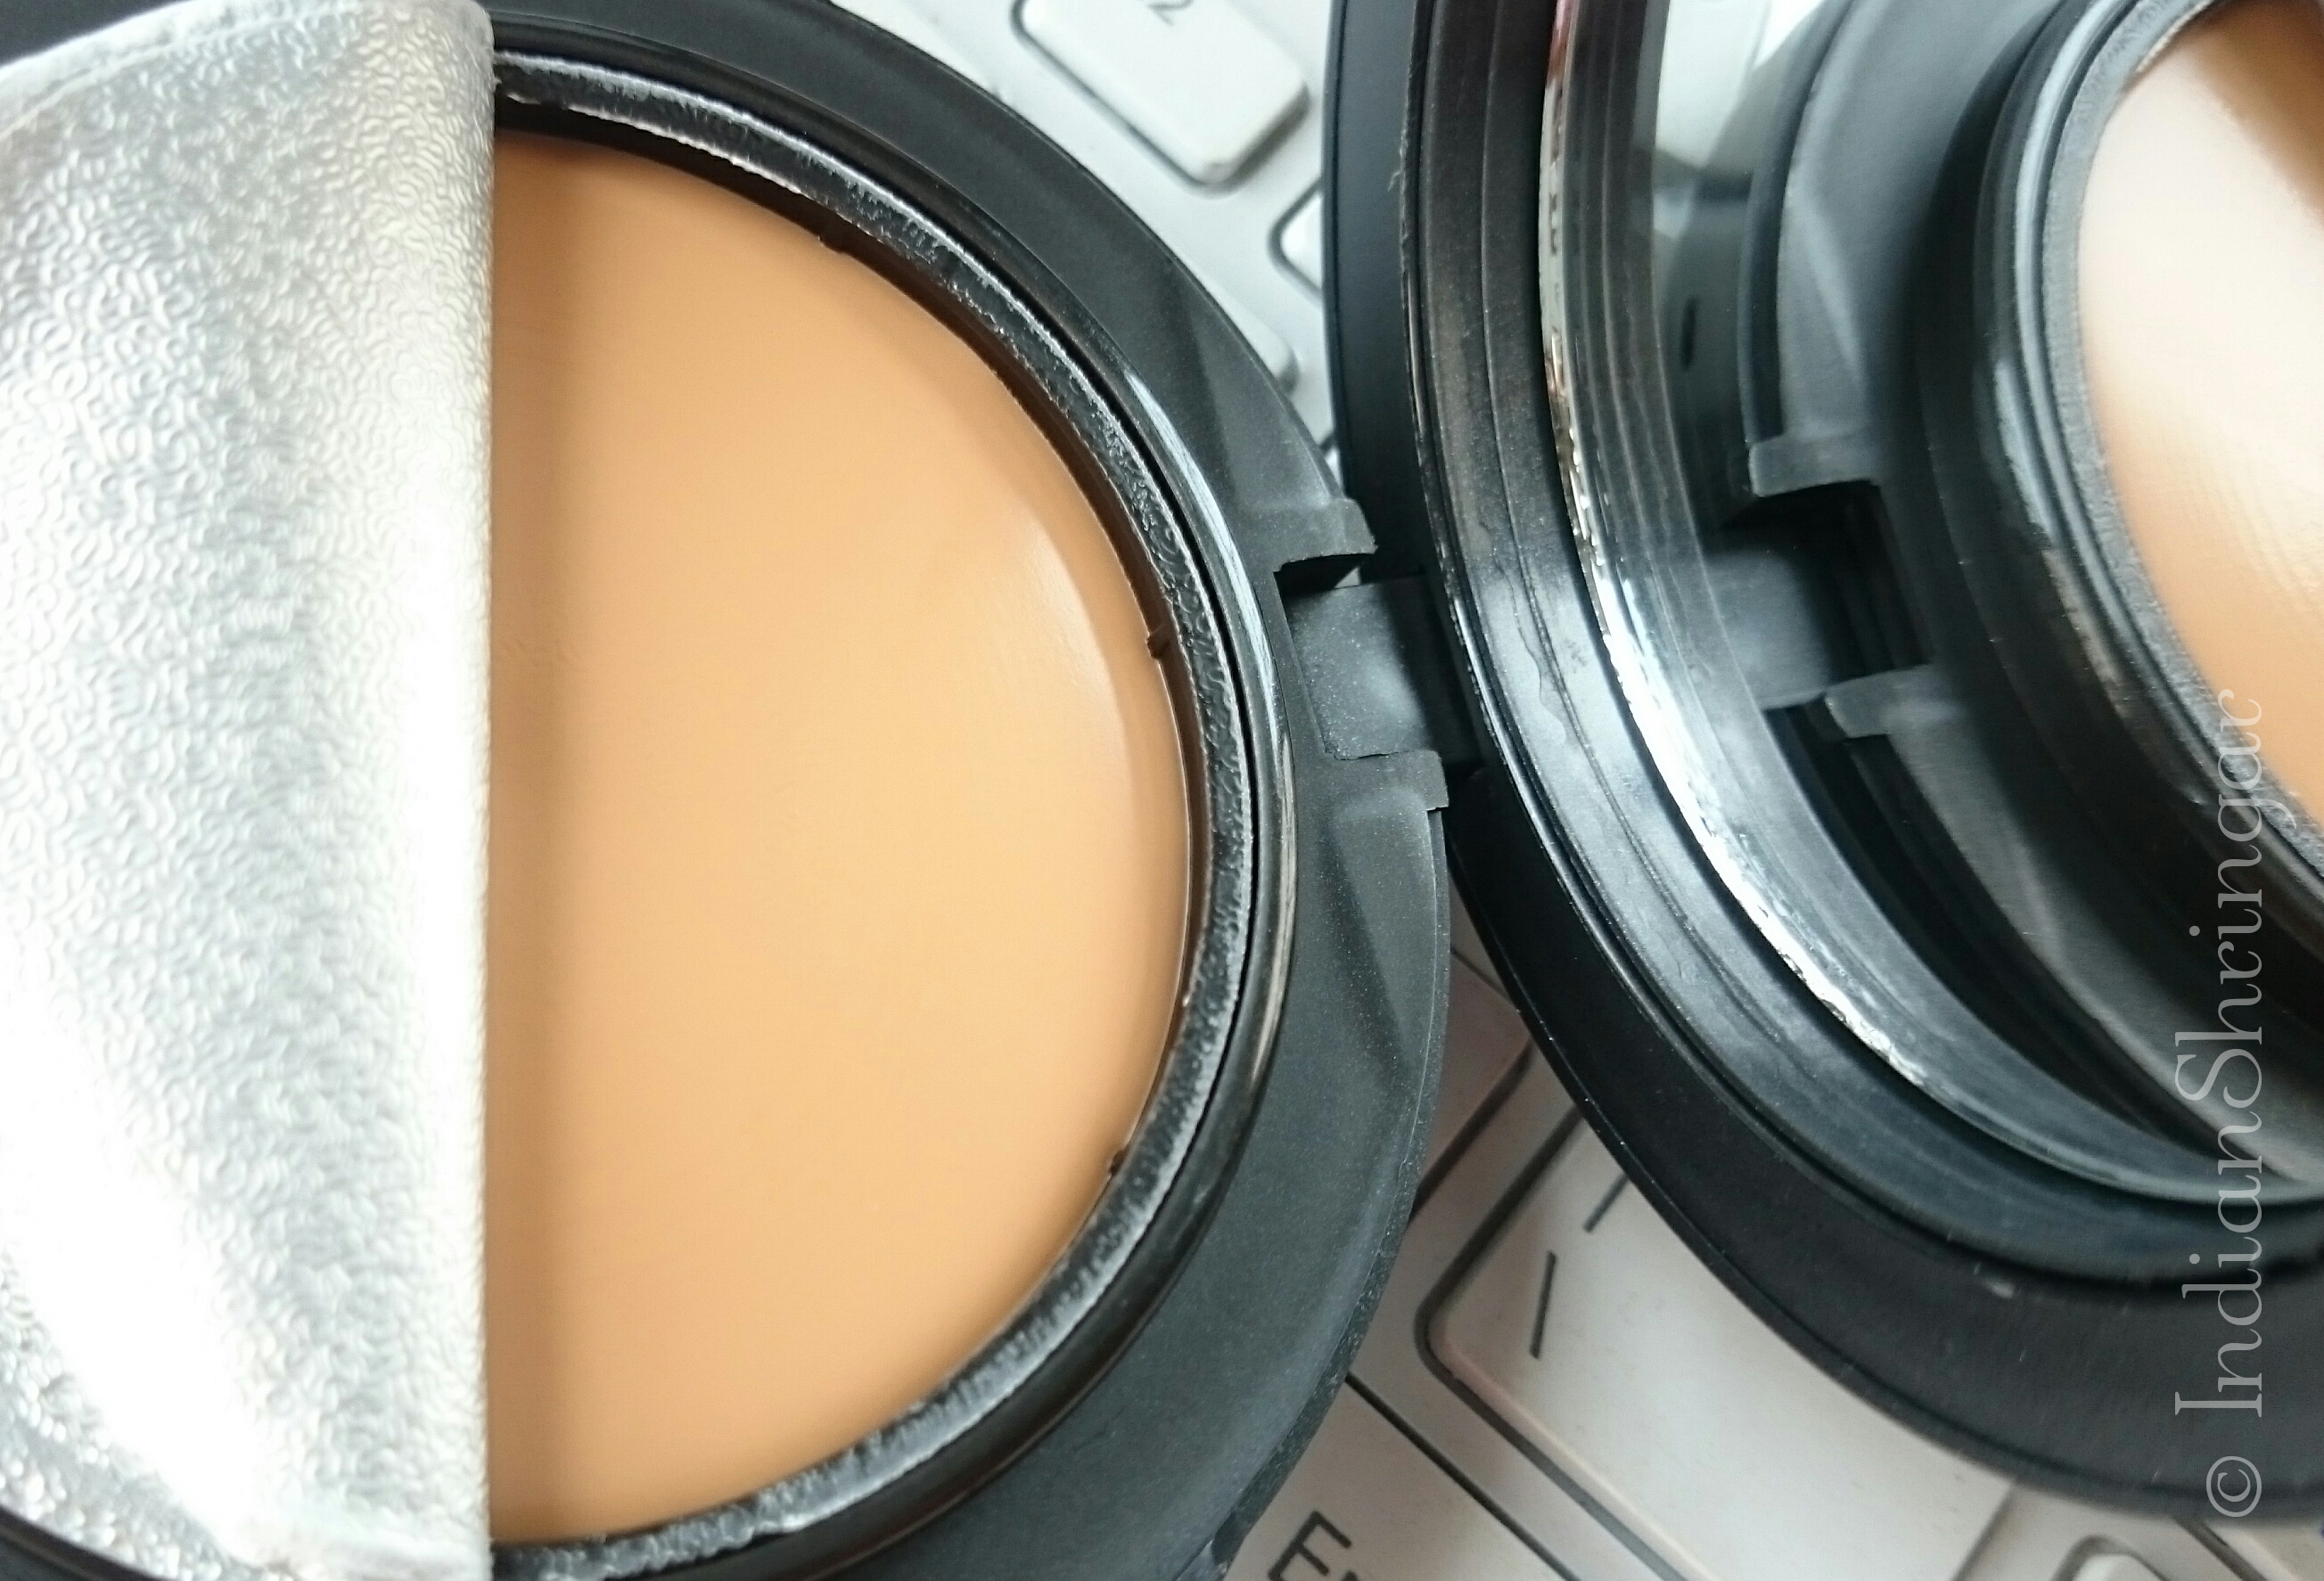 MAC Studio Tech Foundation in NC42 review and swatch